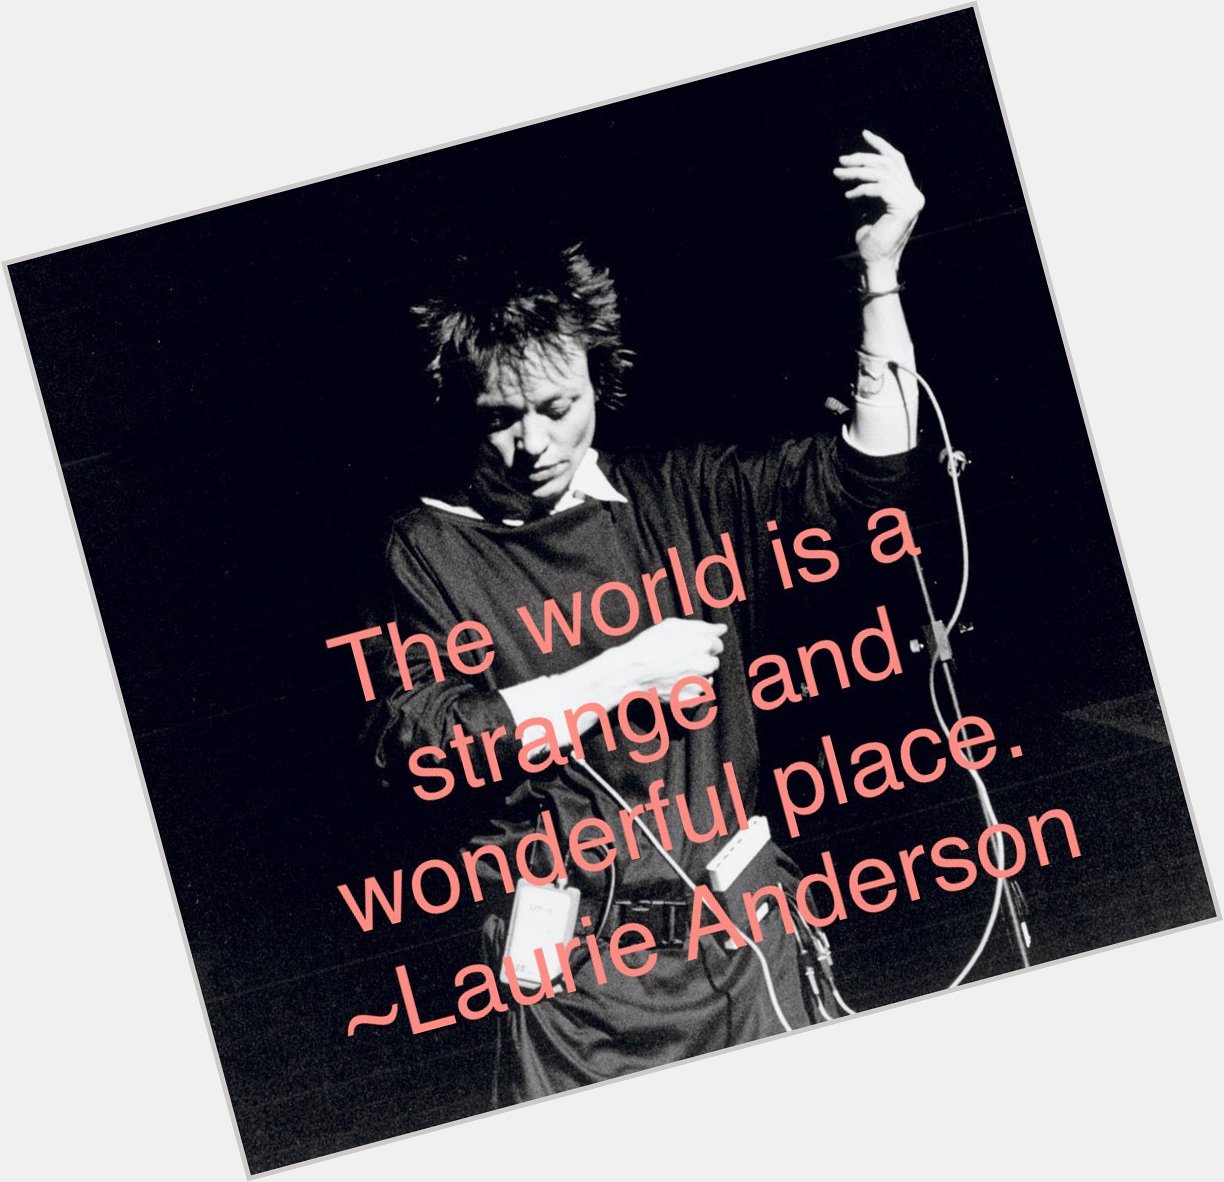 Happy birthday to Laurie Anderson. A source of creative wisdom and inspiration. 